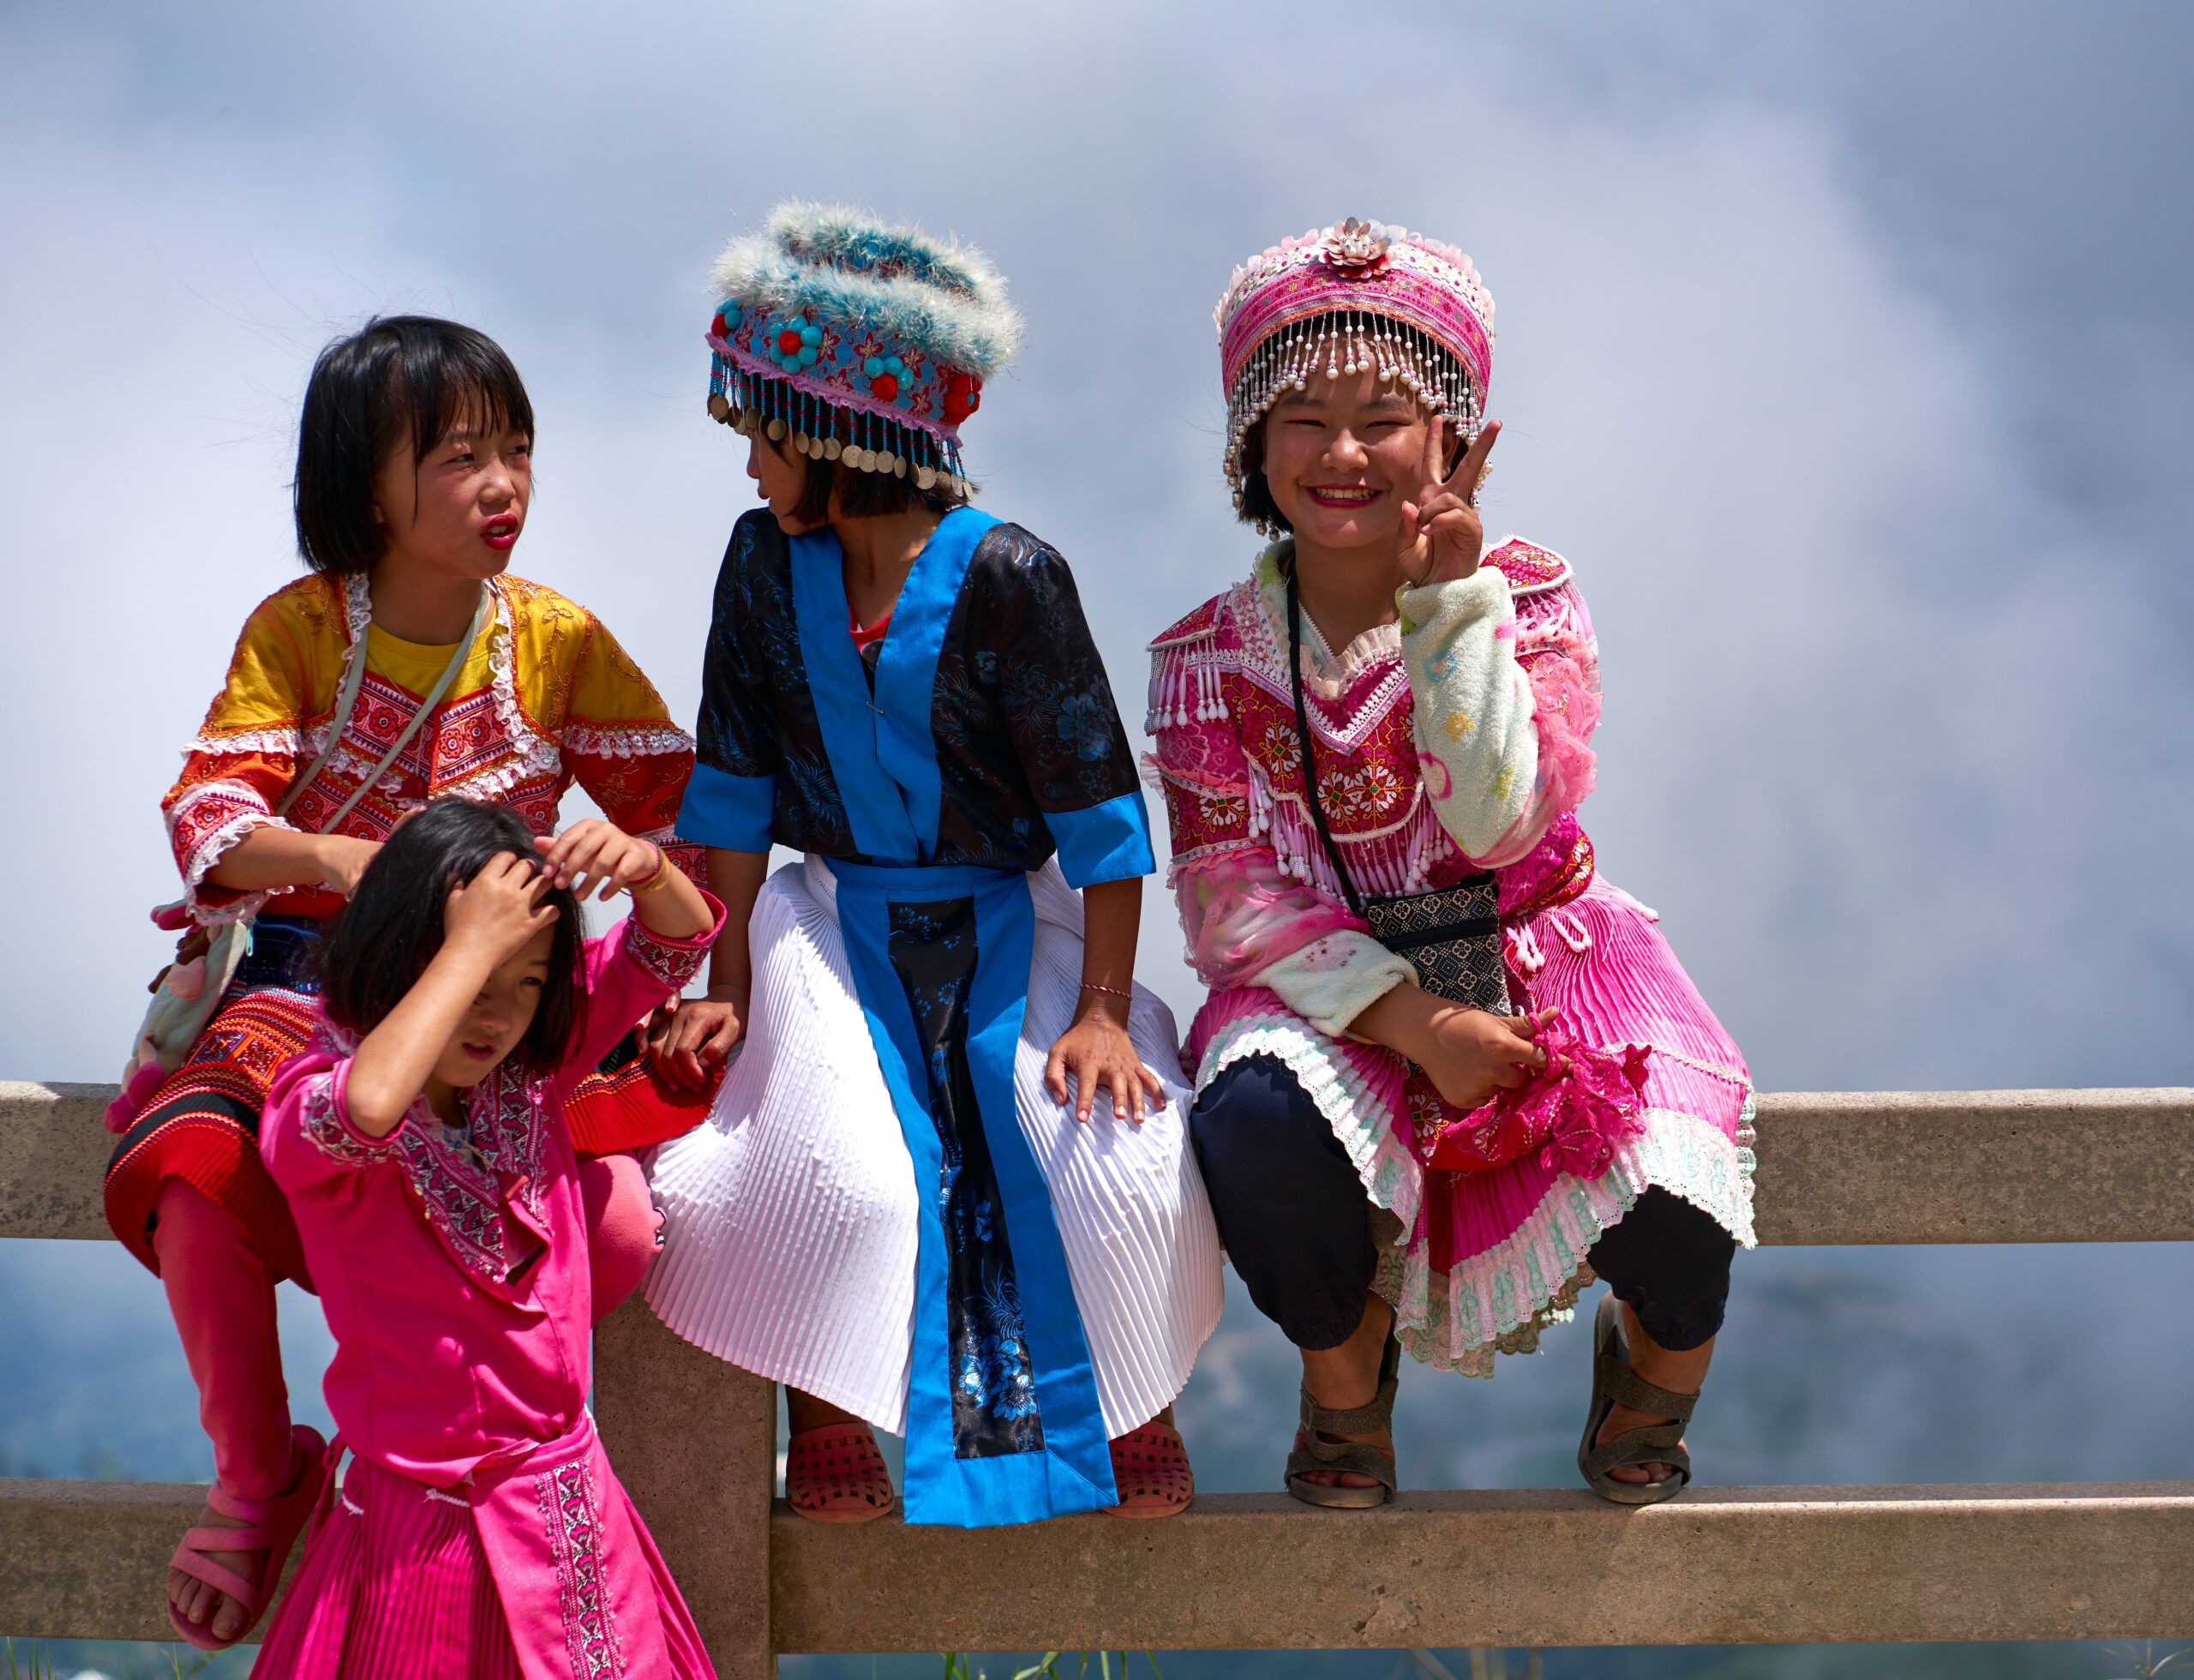 Photo of indigenous children in colorful clothing.